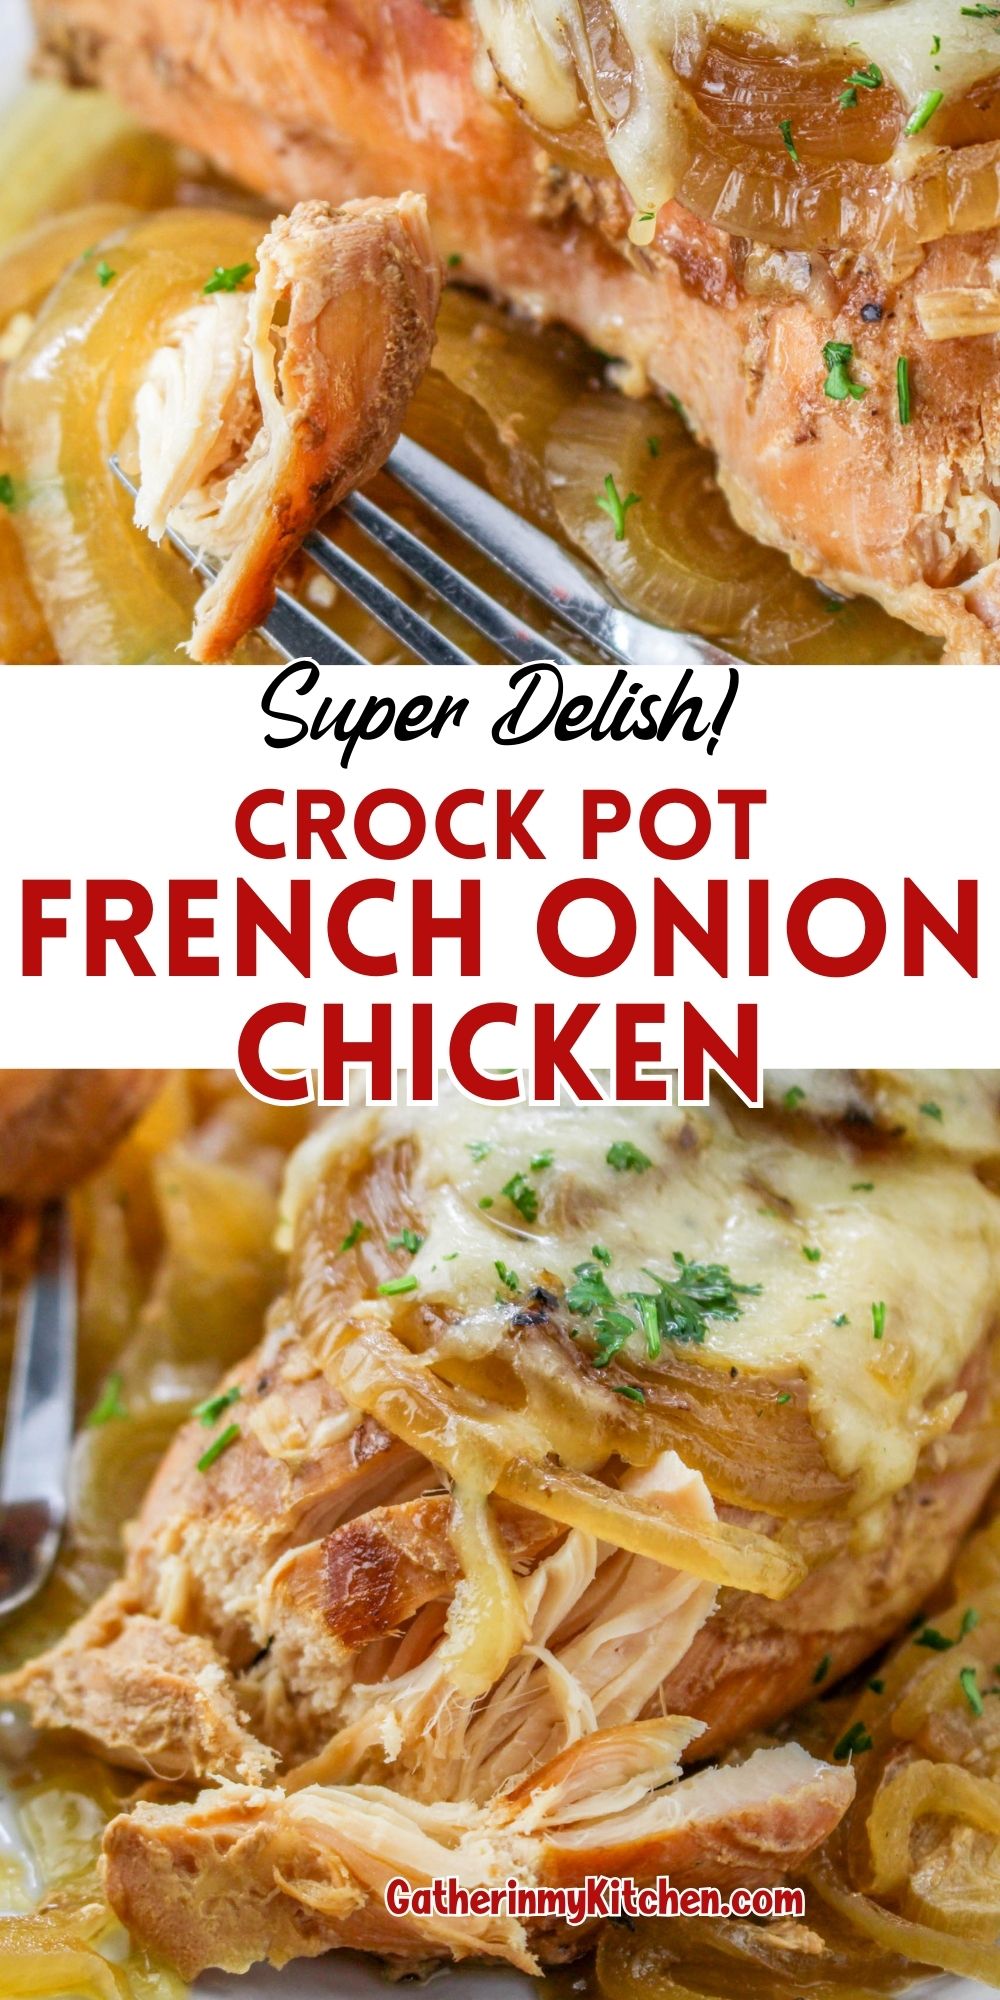 Pin image: top and bottom pics of French Onion chicken and middle says "Super Delish! Crock Pot French Onion Chicken".